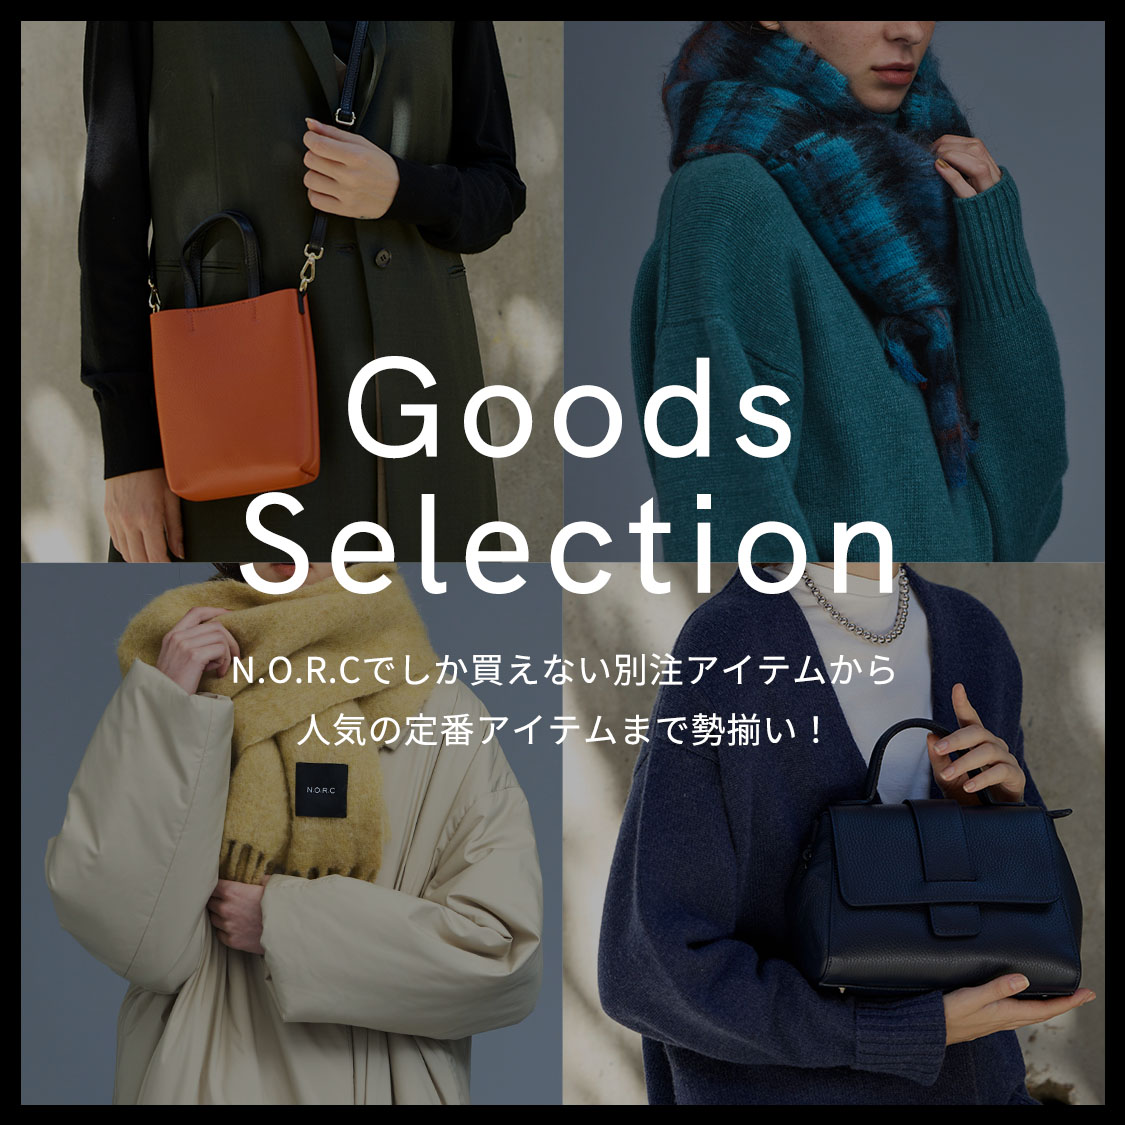 GOODS SELECTION